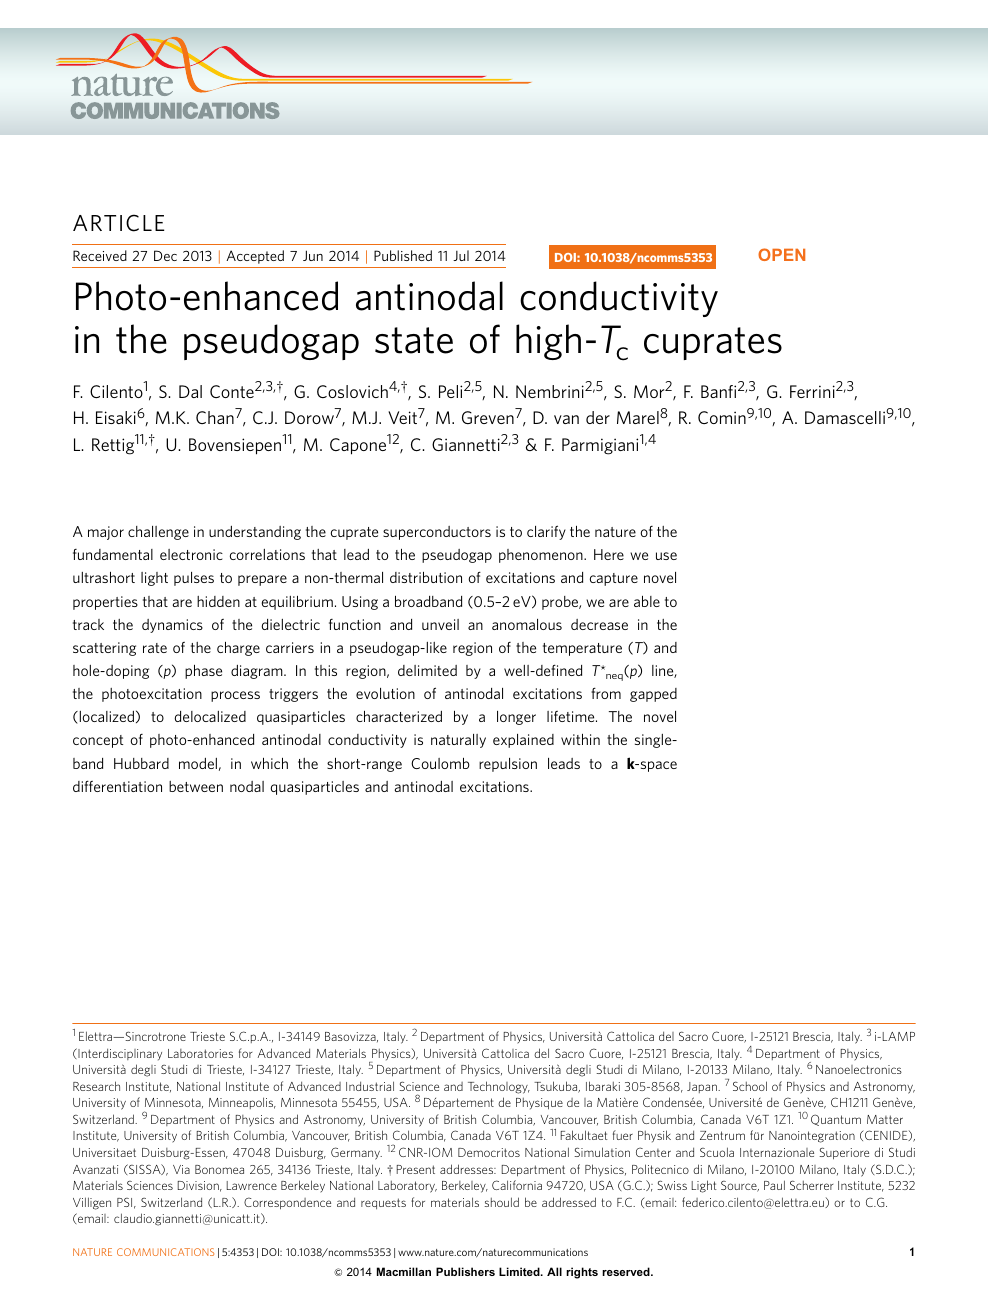 Photo Enhanced Antinodal Conductivity In The Pseudogap State Of High Tc Cuprates Topic Of Research Paper In Physical Sciences Download Scholarly Article Pdf And Read For Free On Cyberleninka Open Science Hub